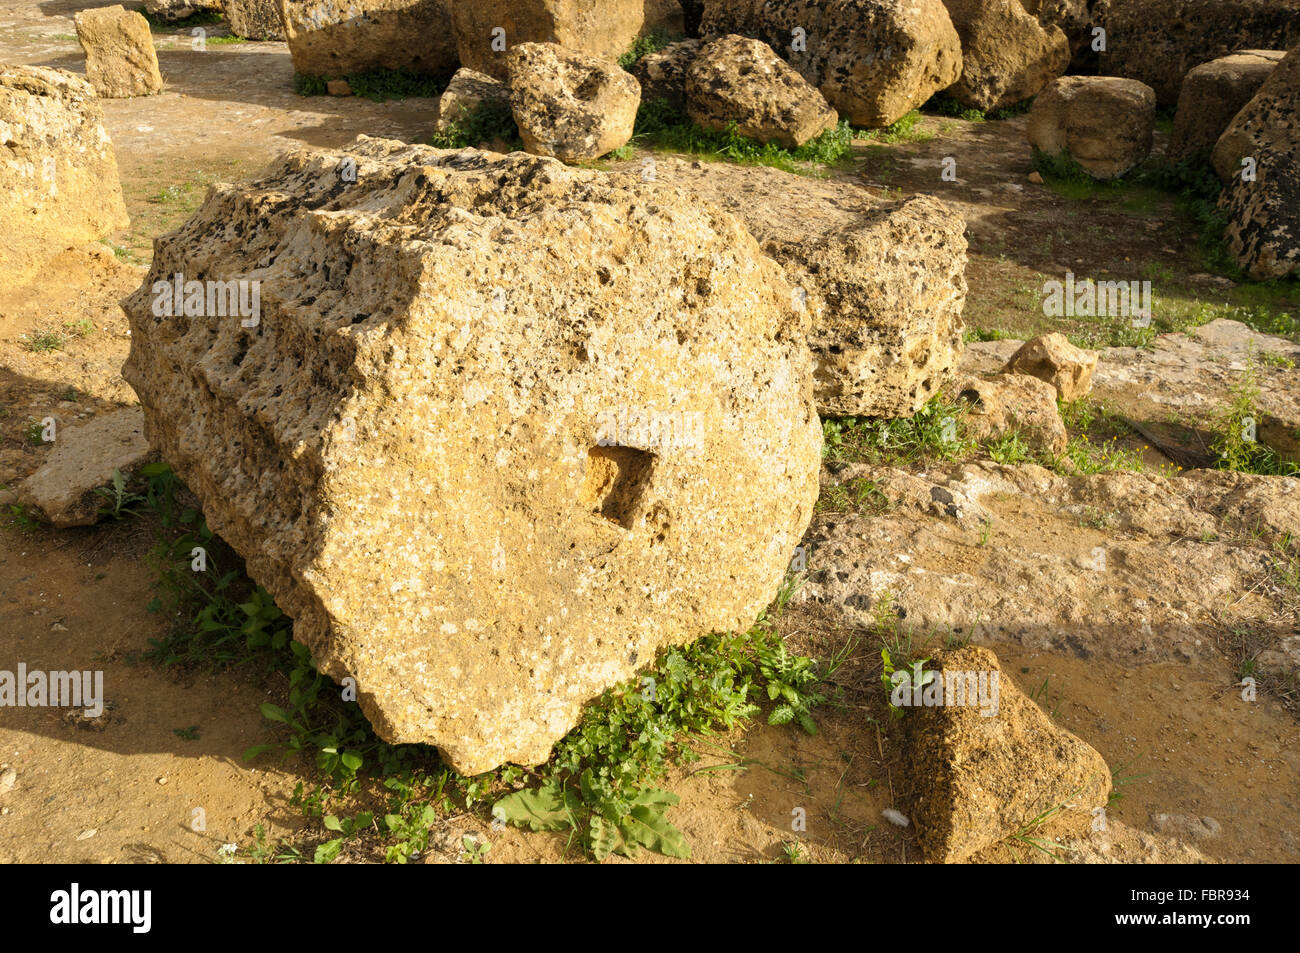 Section of a doric column showing recess for a stone or pin. Valley of Temples, Agrigento, Sicily, Italy Stock Photo